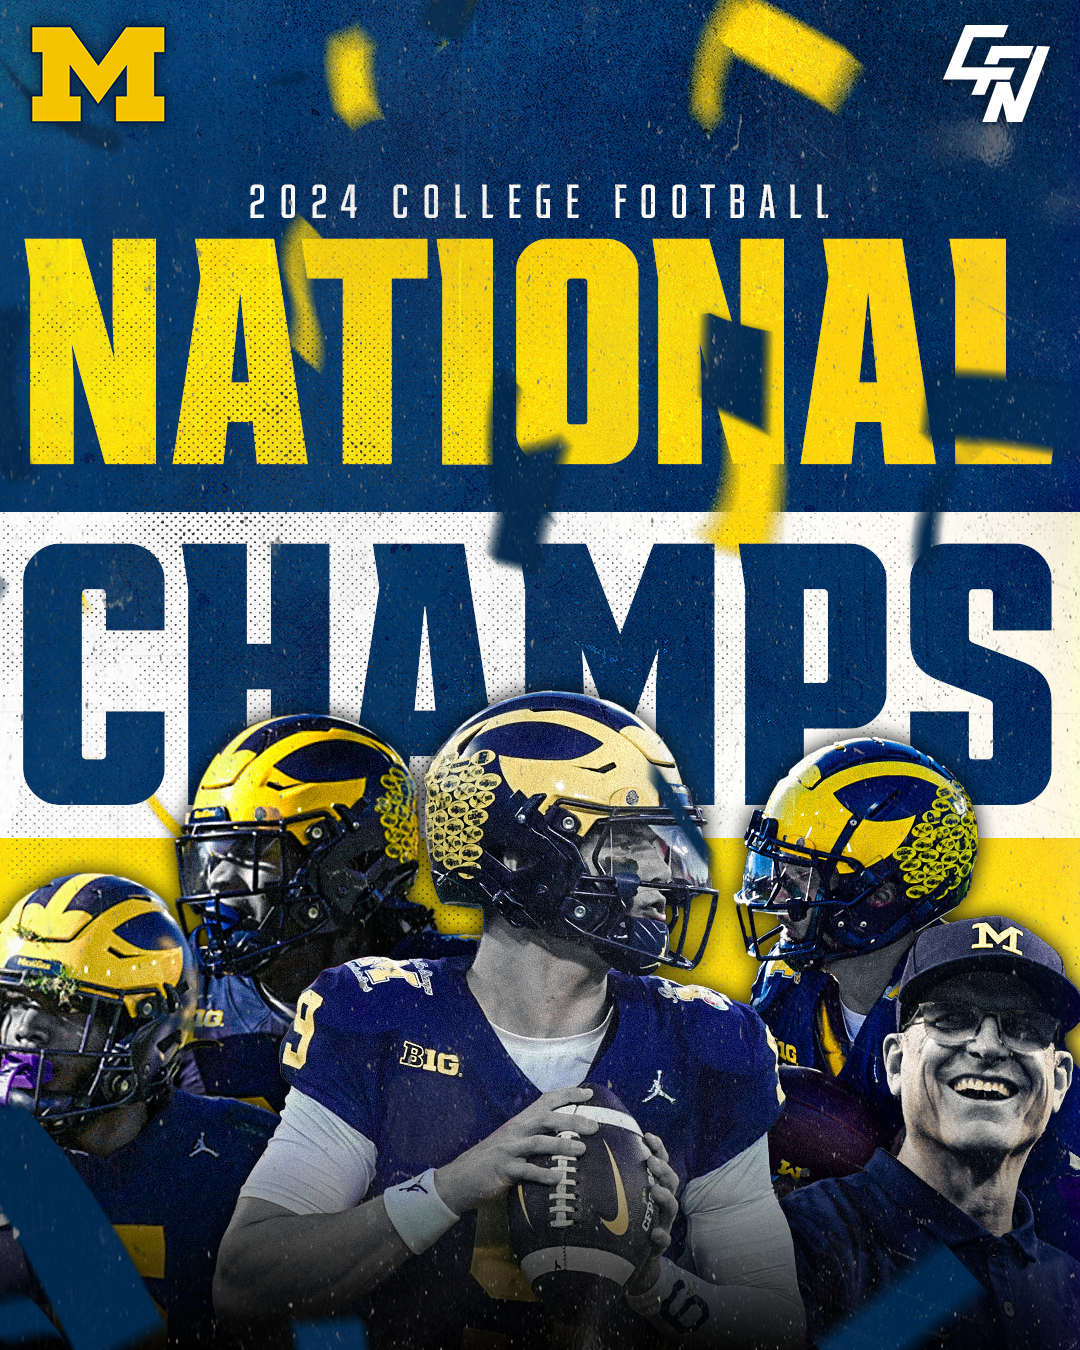 The Michigan Wolverines Are National Champions